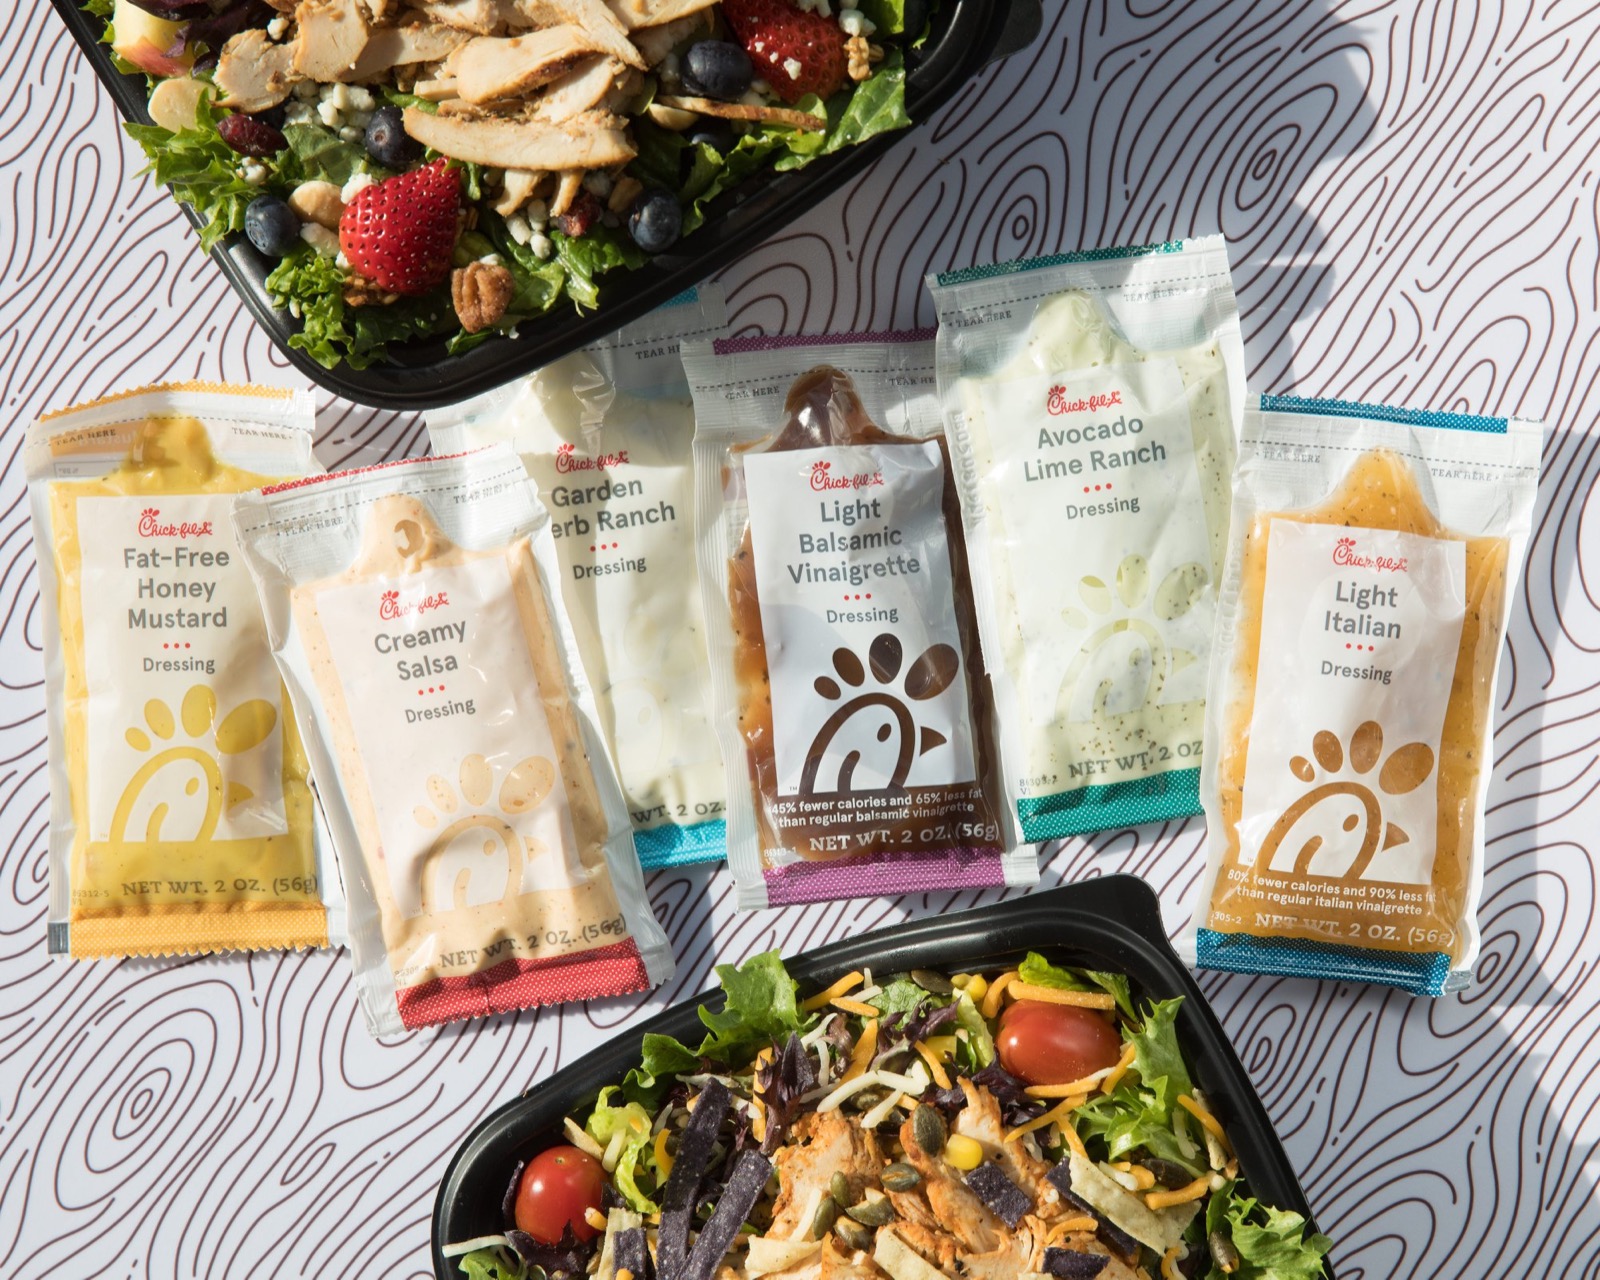 Can We Guess Your Age and Gender Based on Your Chick-fil-A Order? Chick-fil-A salad dressings